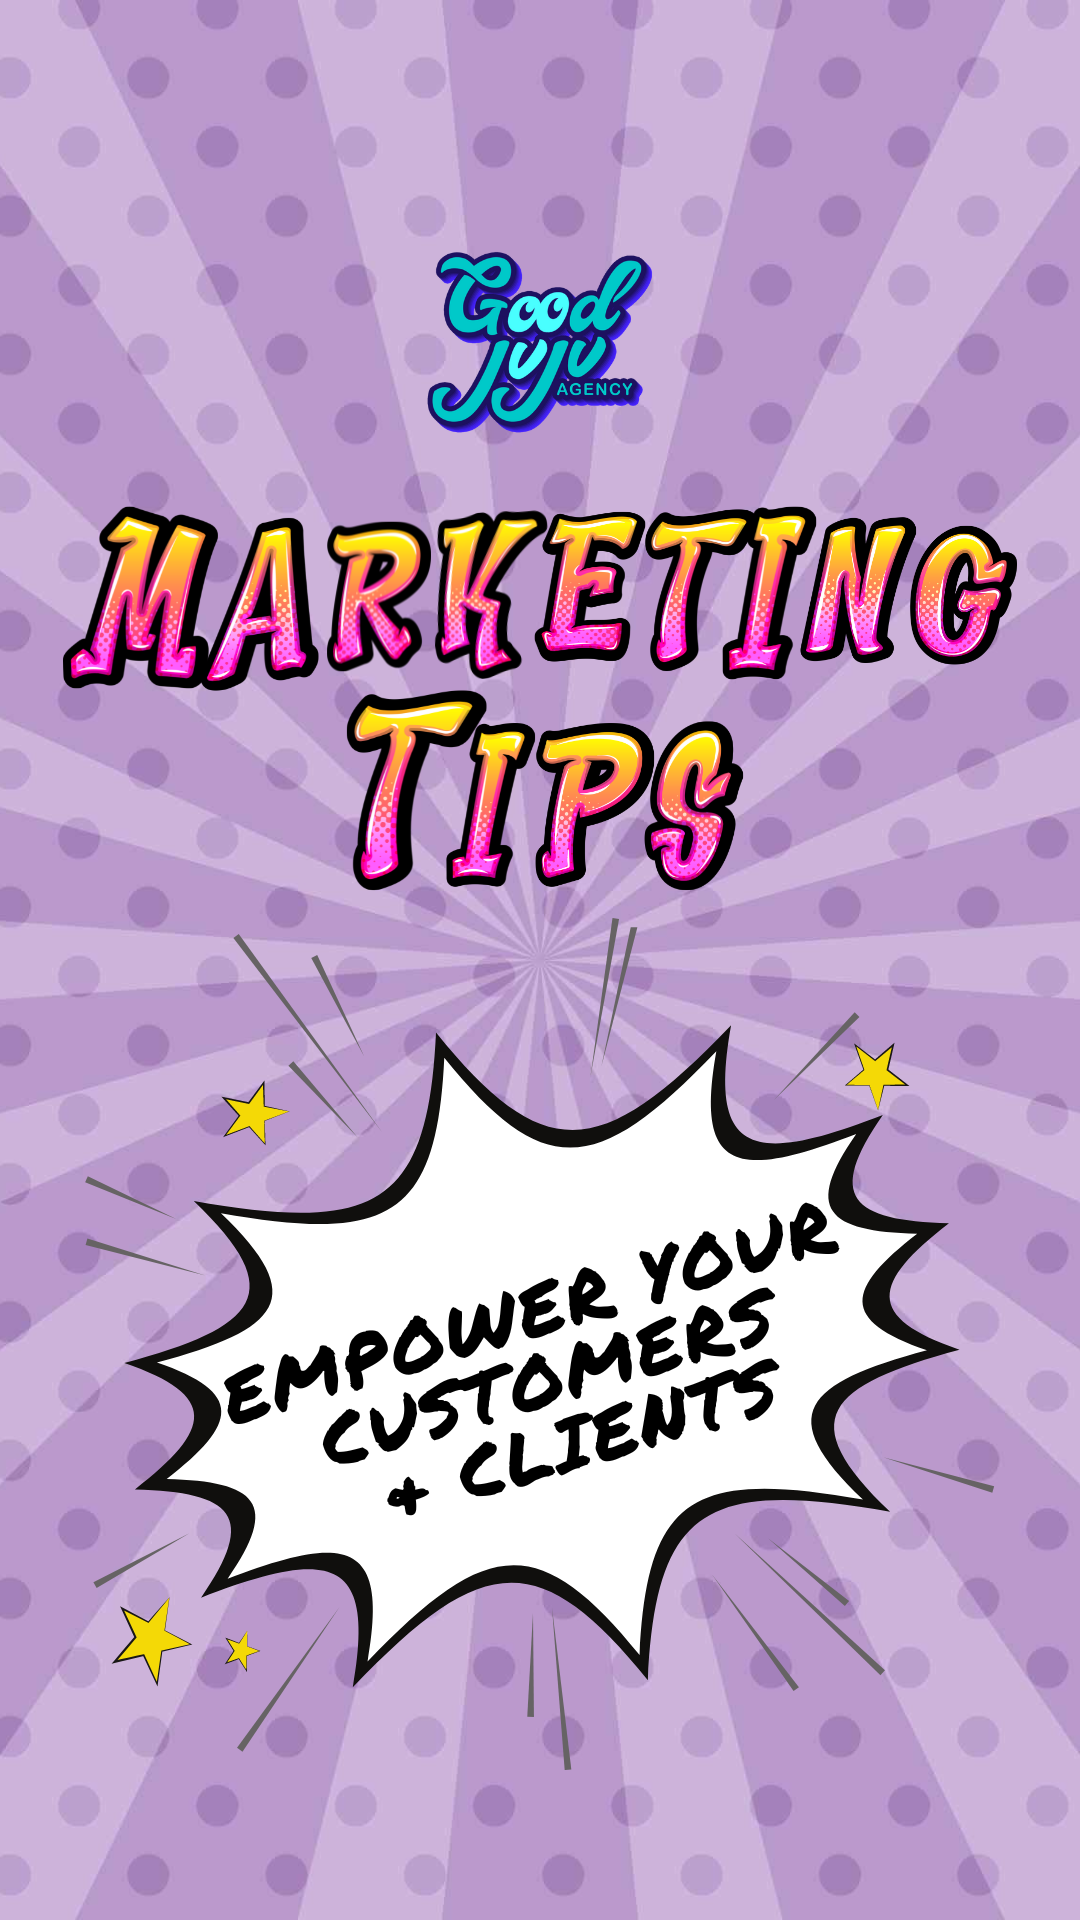 EMPOWER YOUR CUSTOMERS & CLIENTS Cover Image